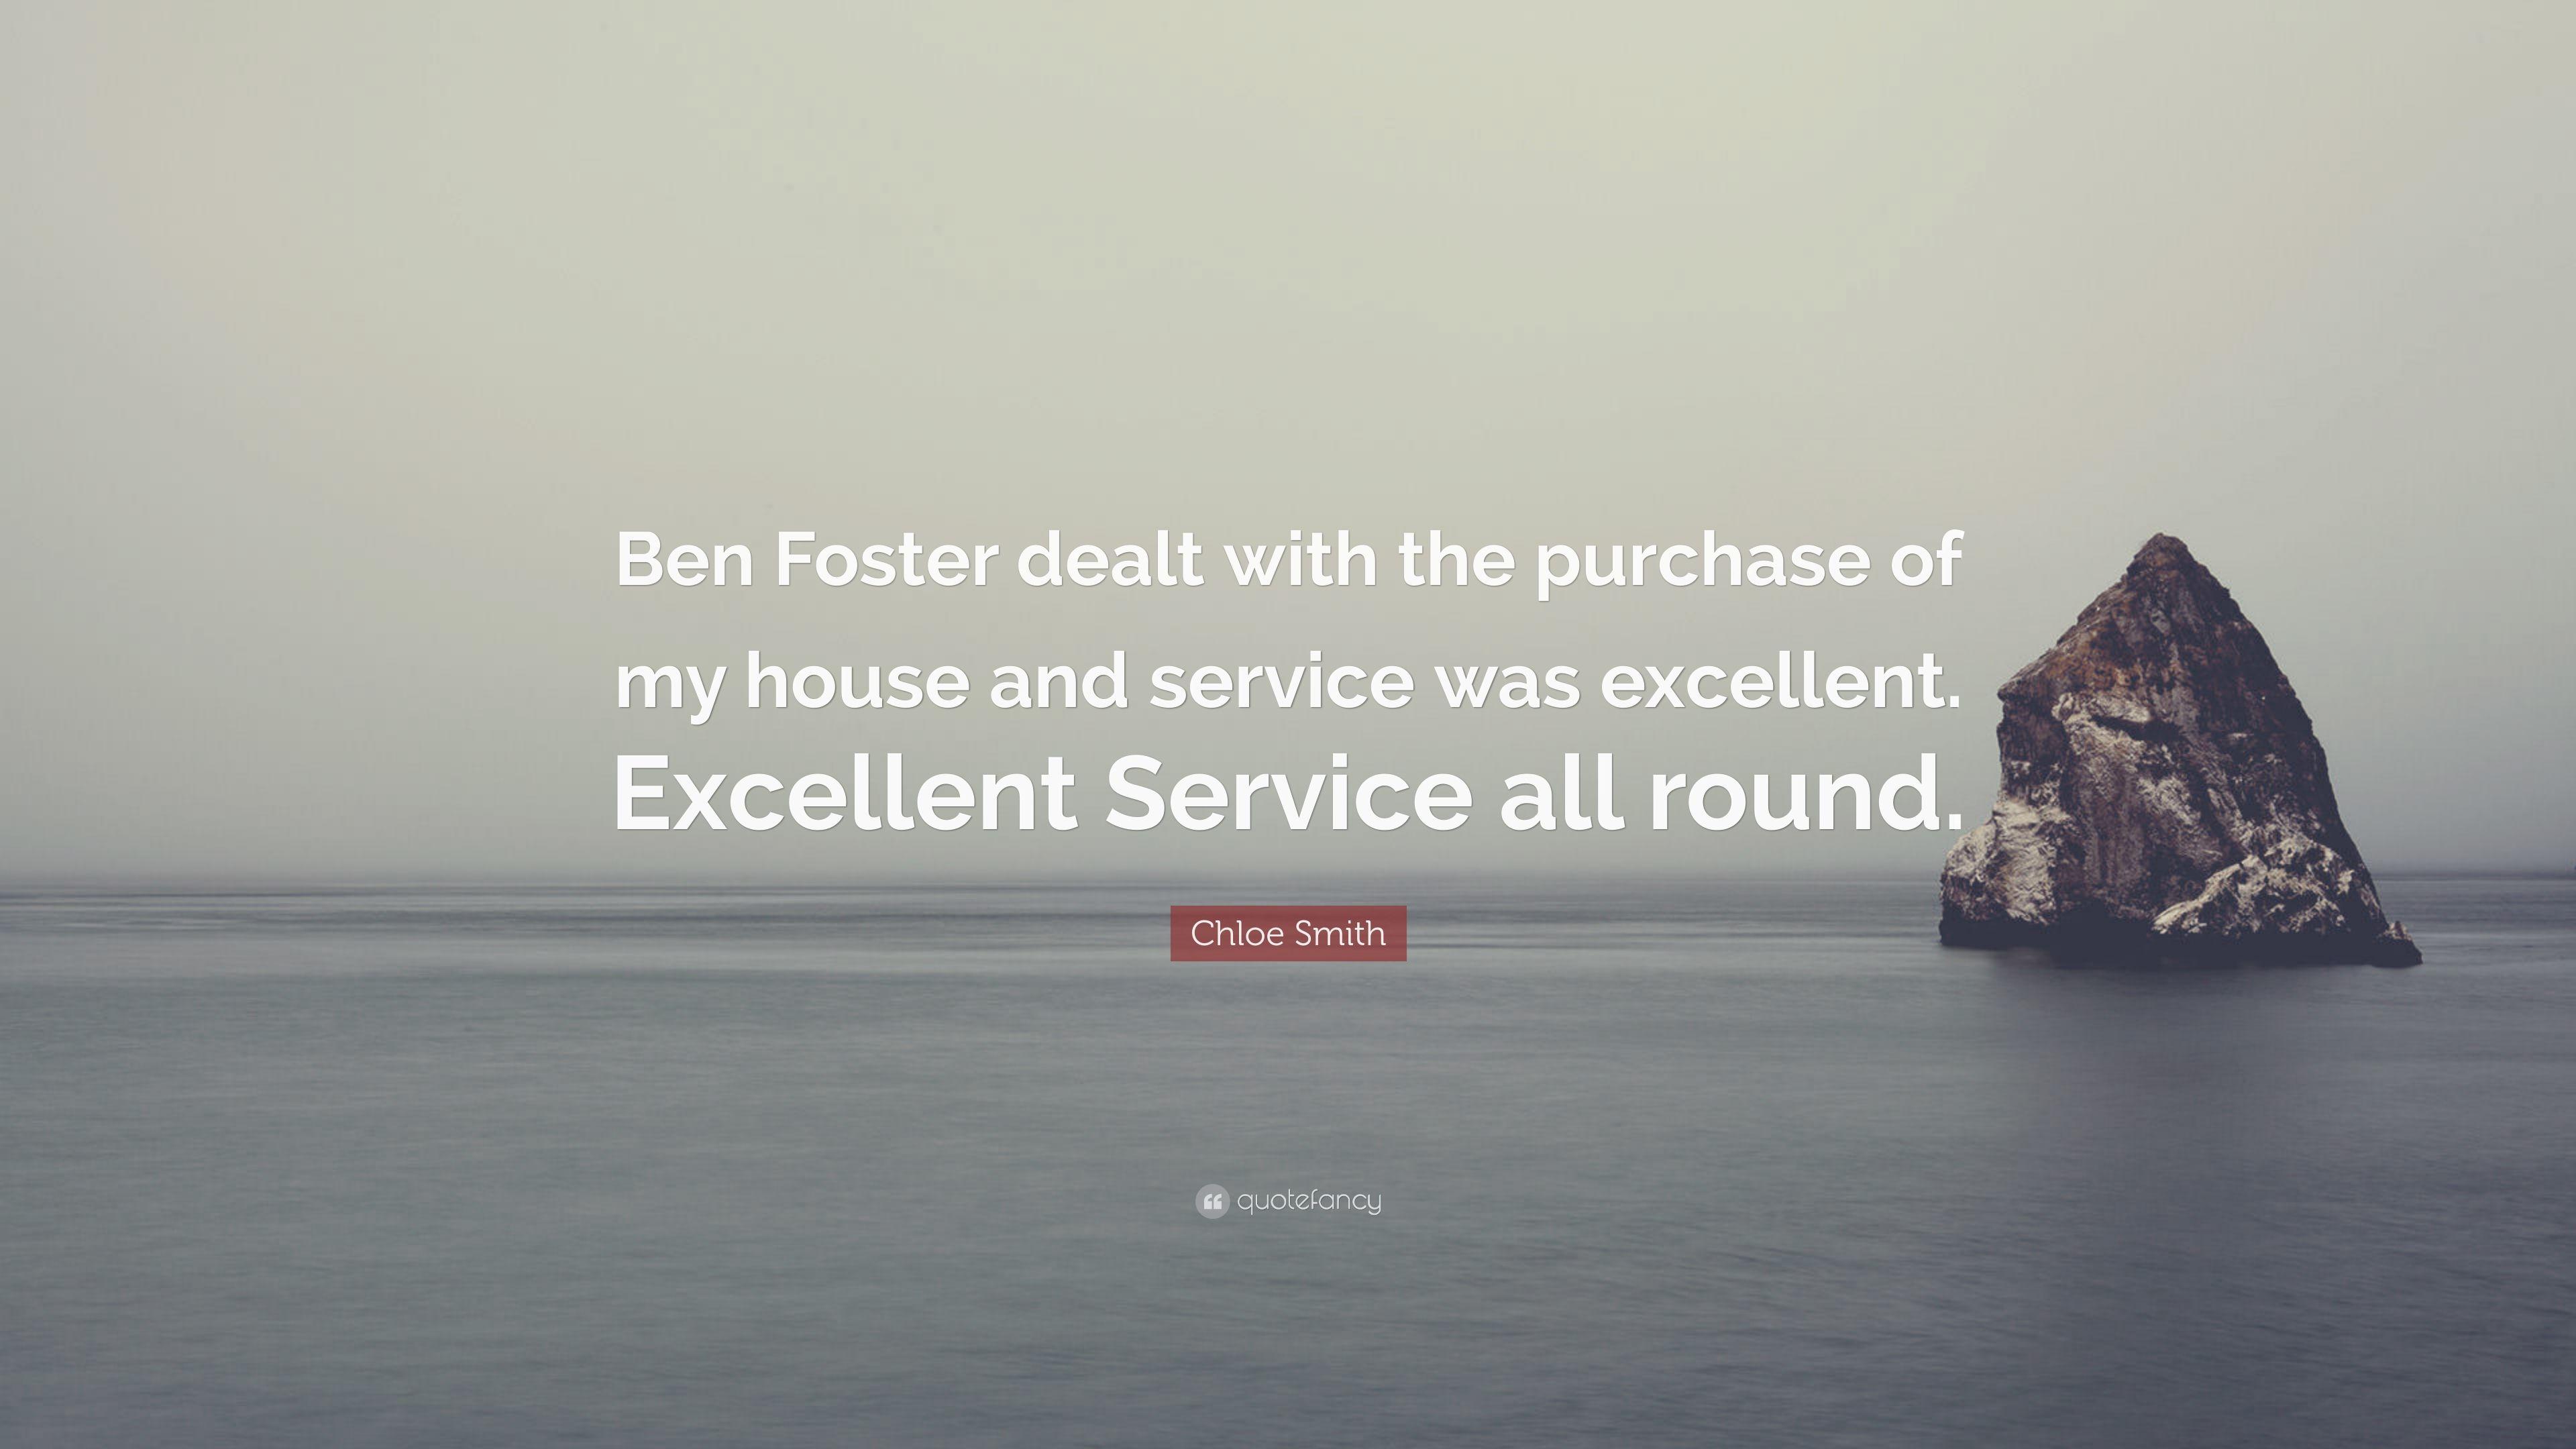 Chloe Smith Quote: “Ben Foster dealt with the purchase of my house